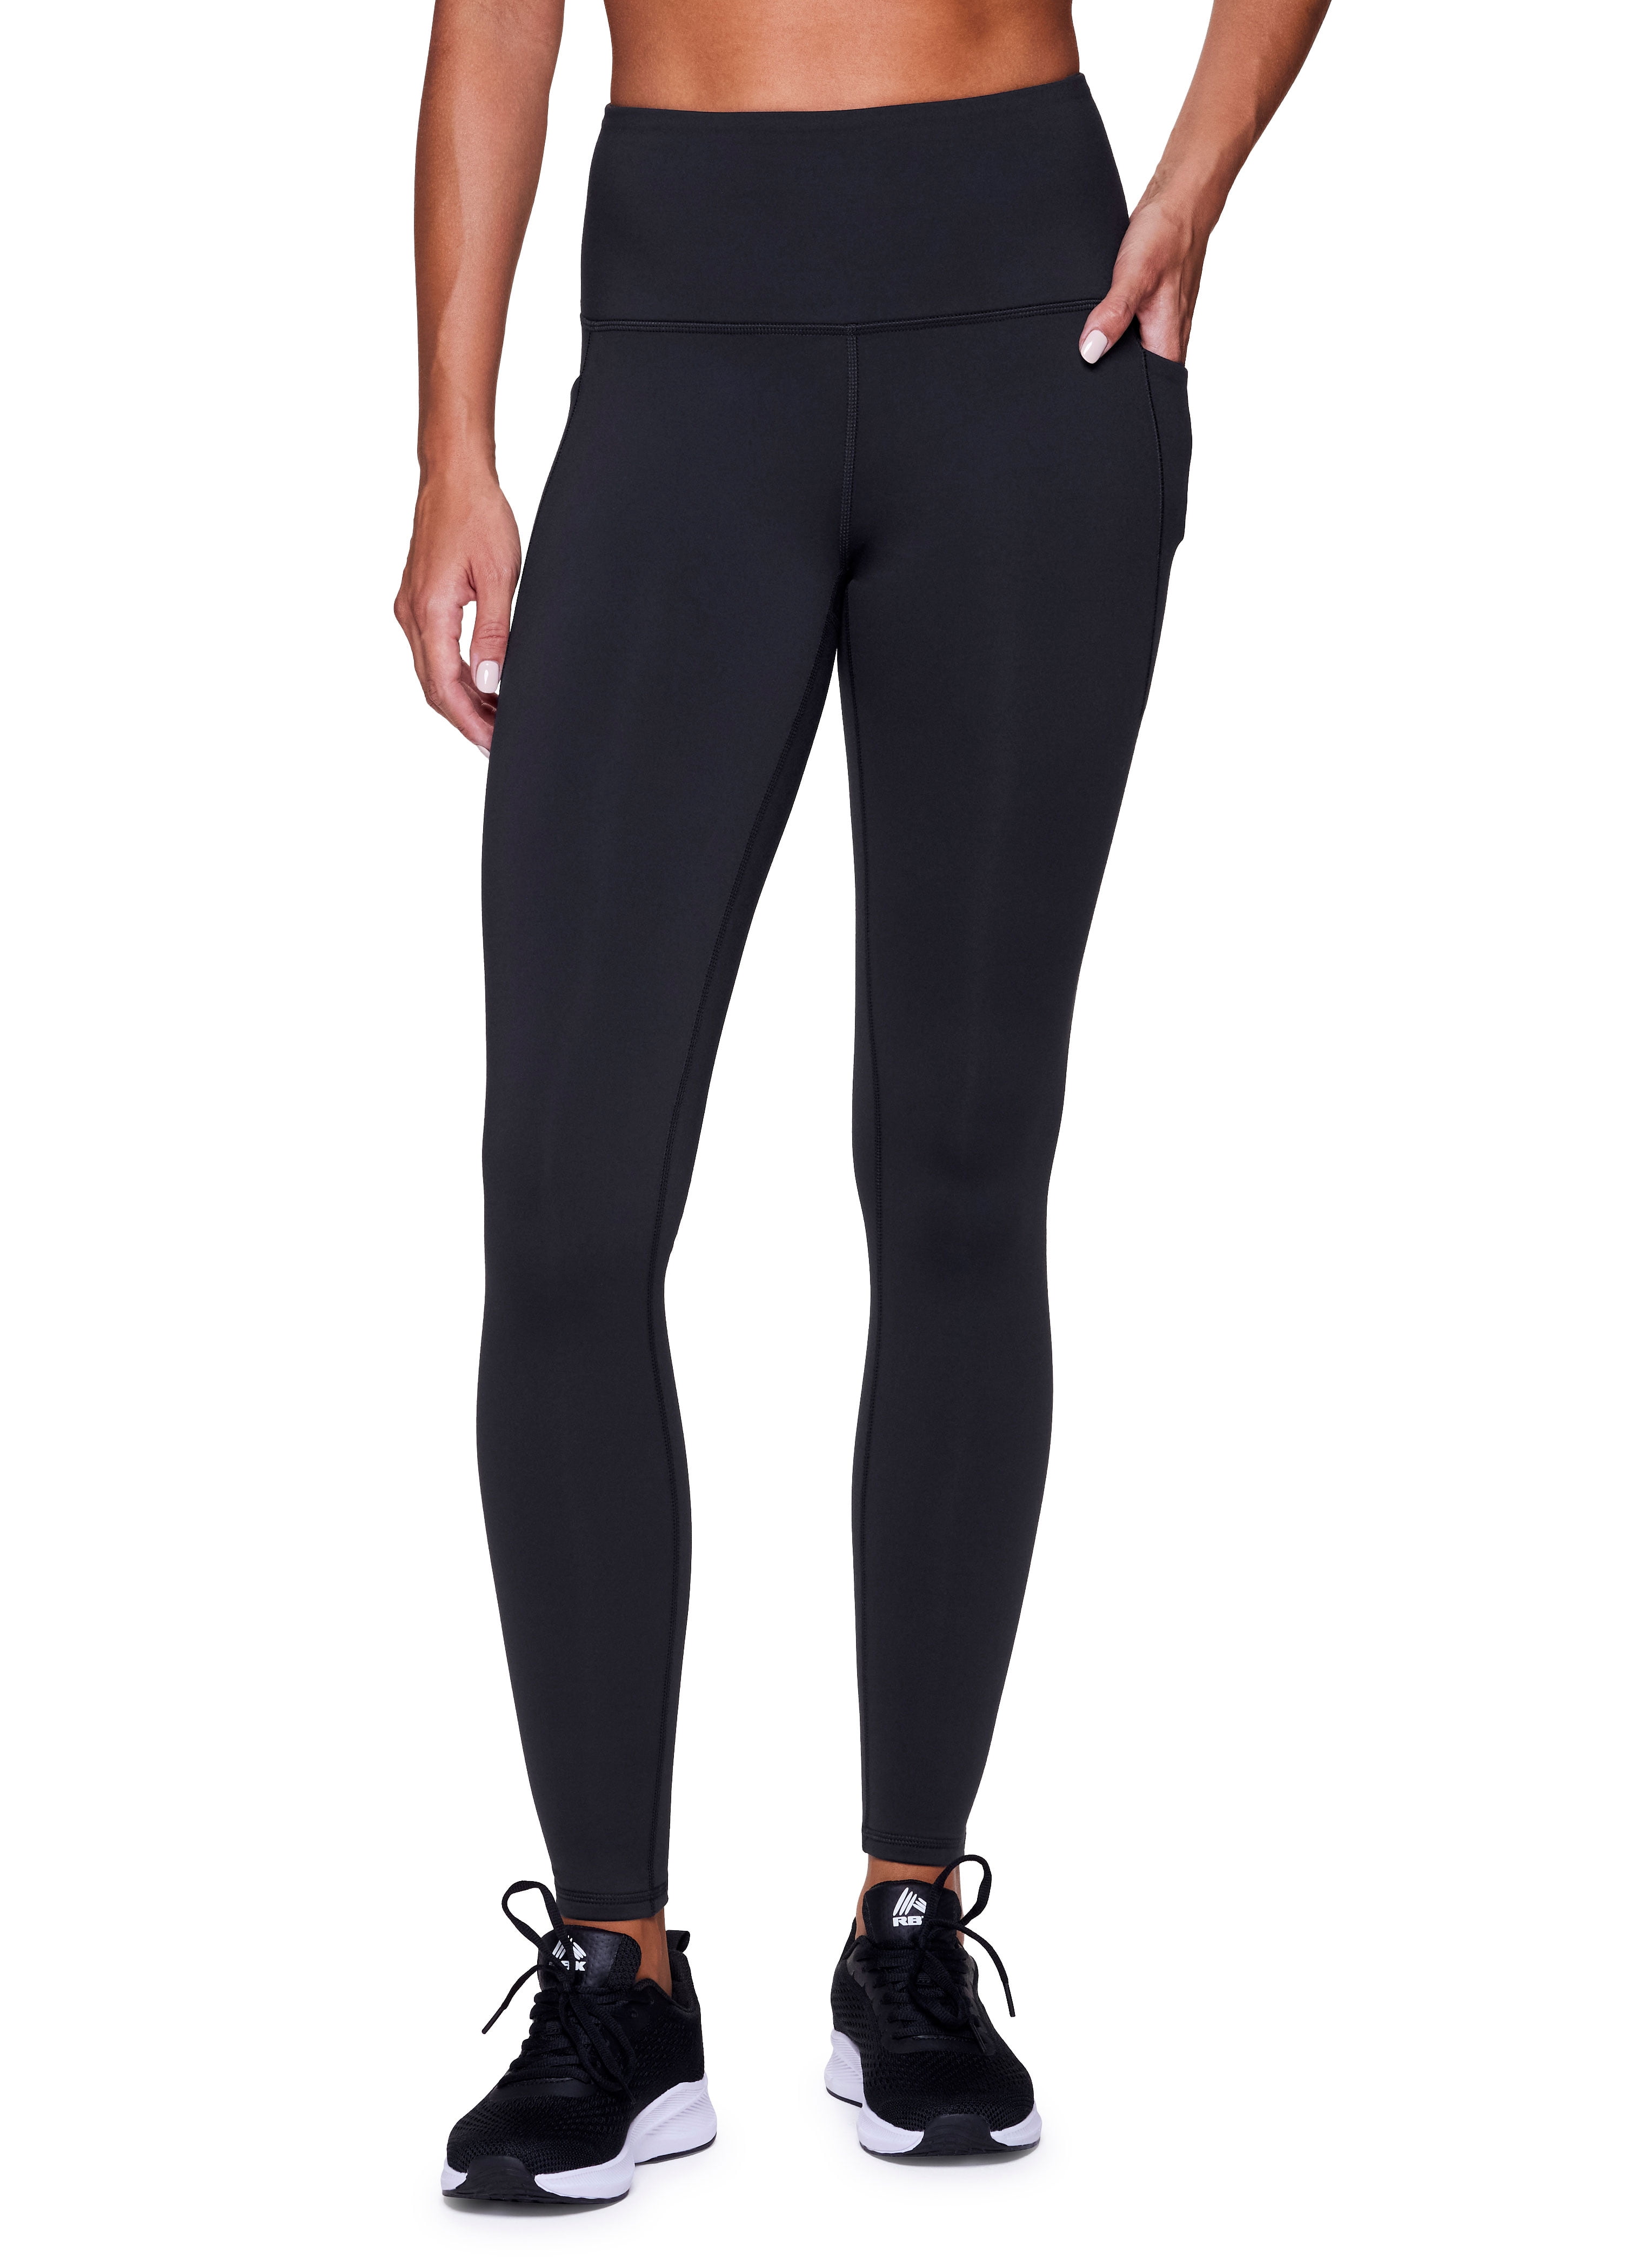 RBX Active Women's Buttery Soft Squat Proof 7/8 Legging with Pockets